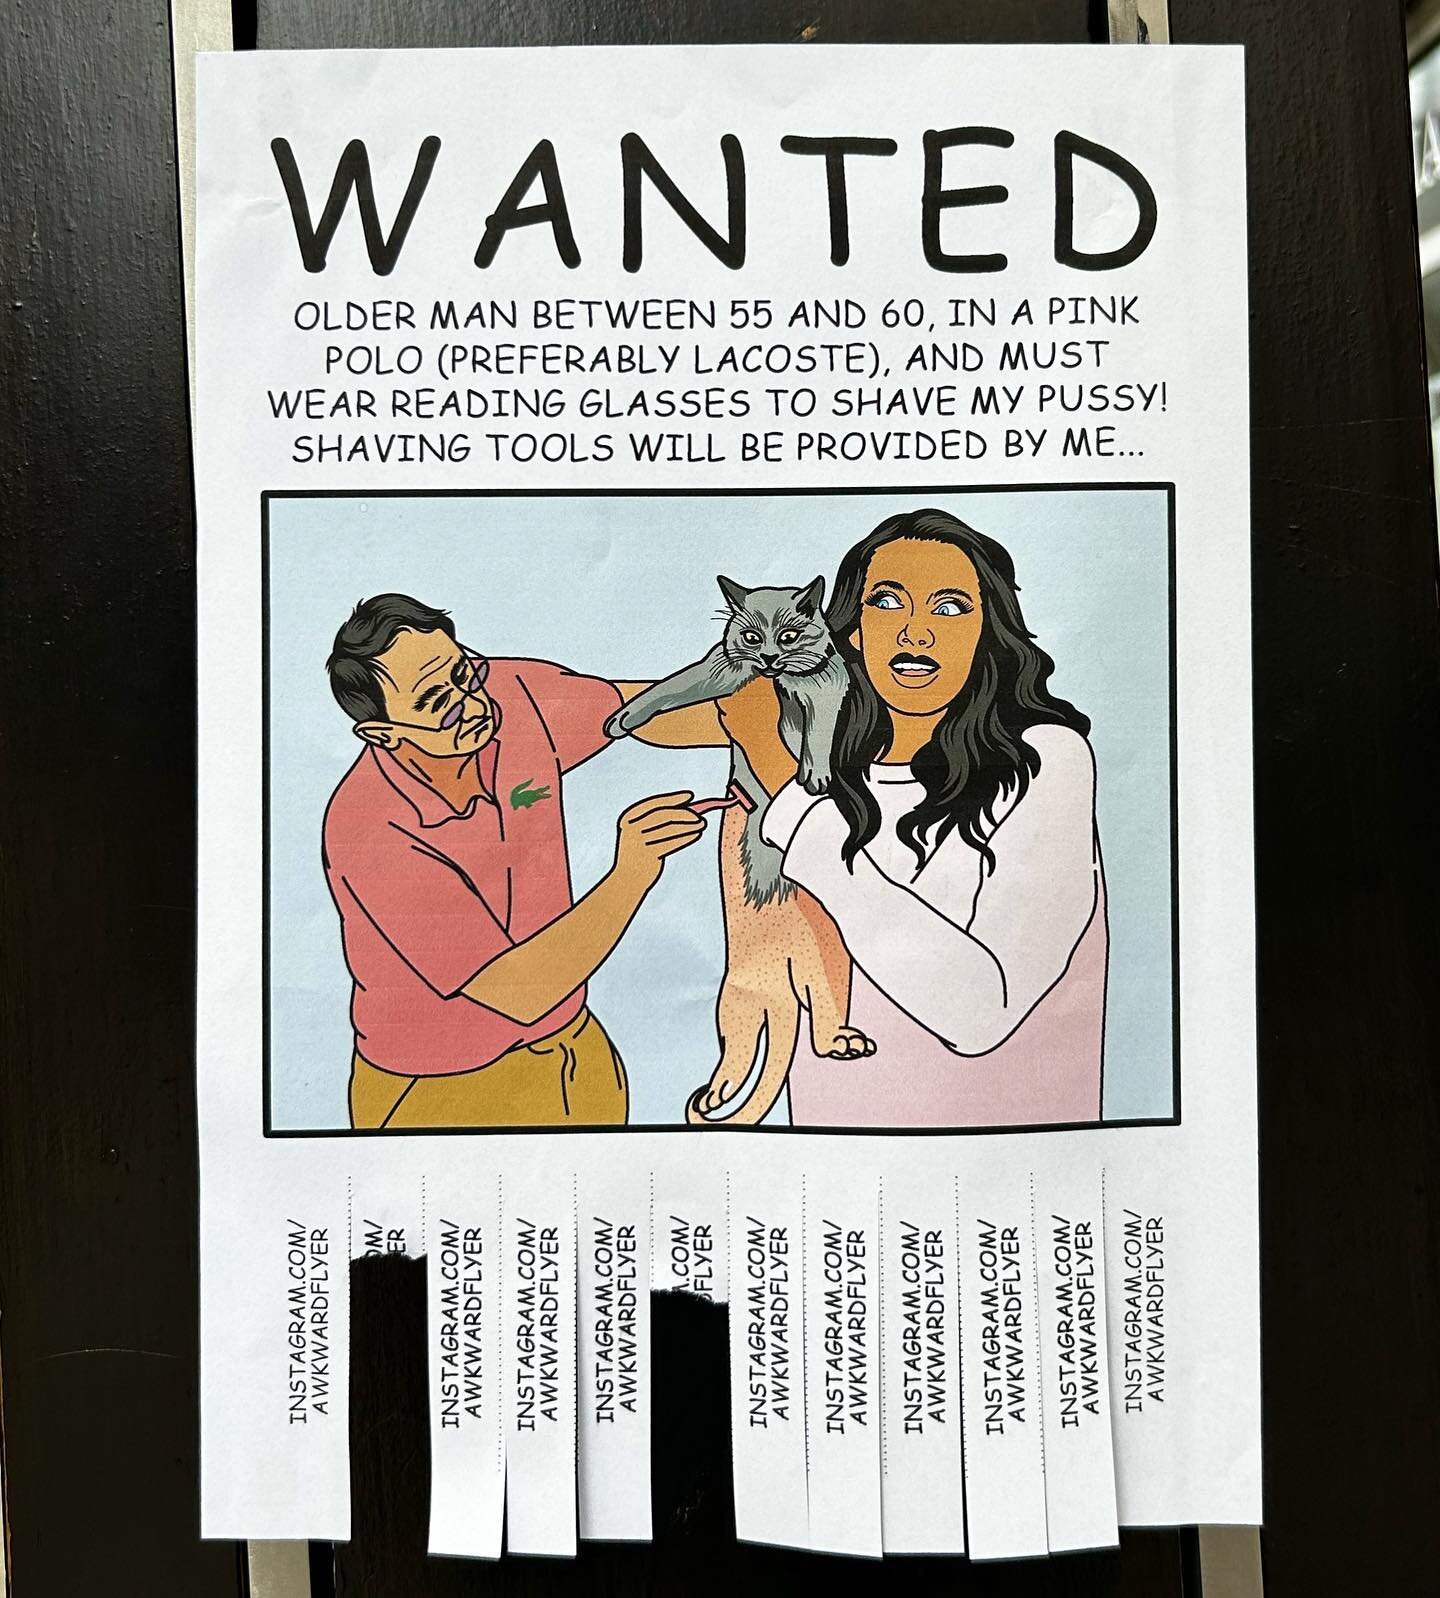 Wanted older man between 55 and 60, in a pink polo (preferably lacoste), and must wear reading glasses to shave my pussy! Shaving tools will be provided by me....... #awkwardflyer #awkward #flyer #street #steetart #art #workshop #drawing #funny #haha